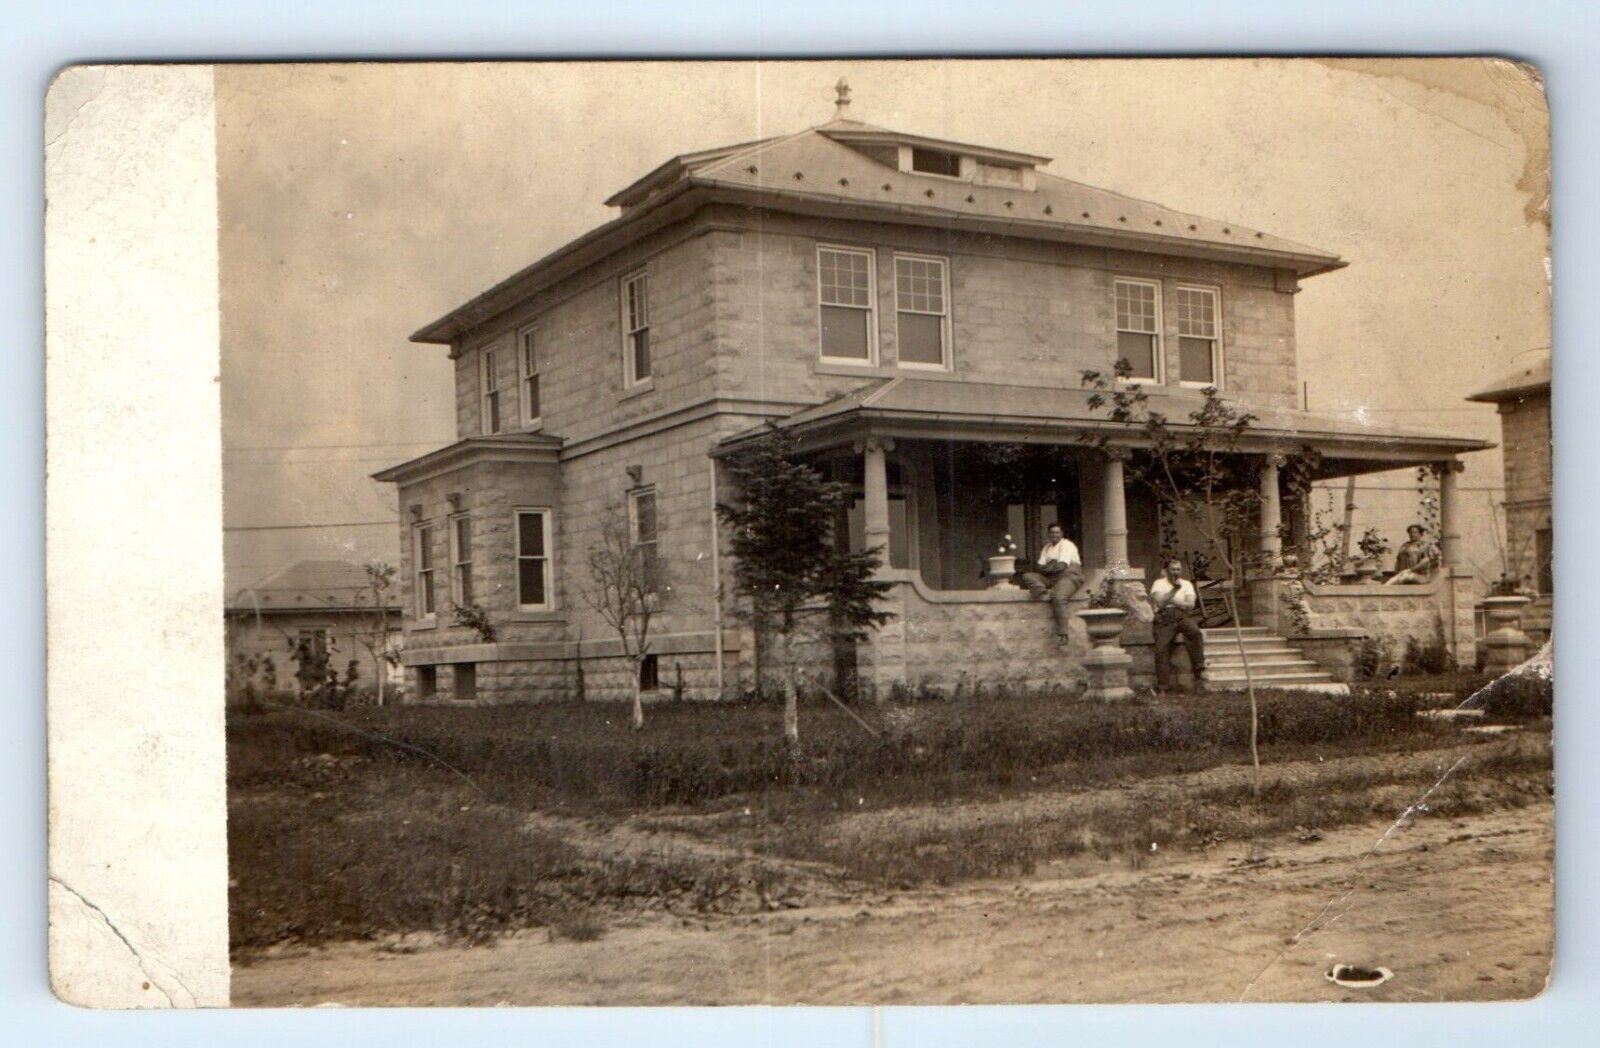 Family Sitting on Front Porch Smoking Portrait Early America RPPC Postcard c1910